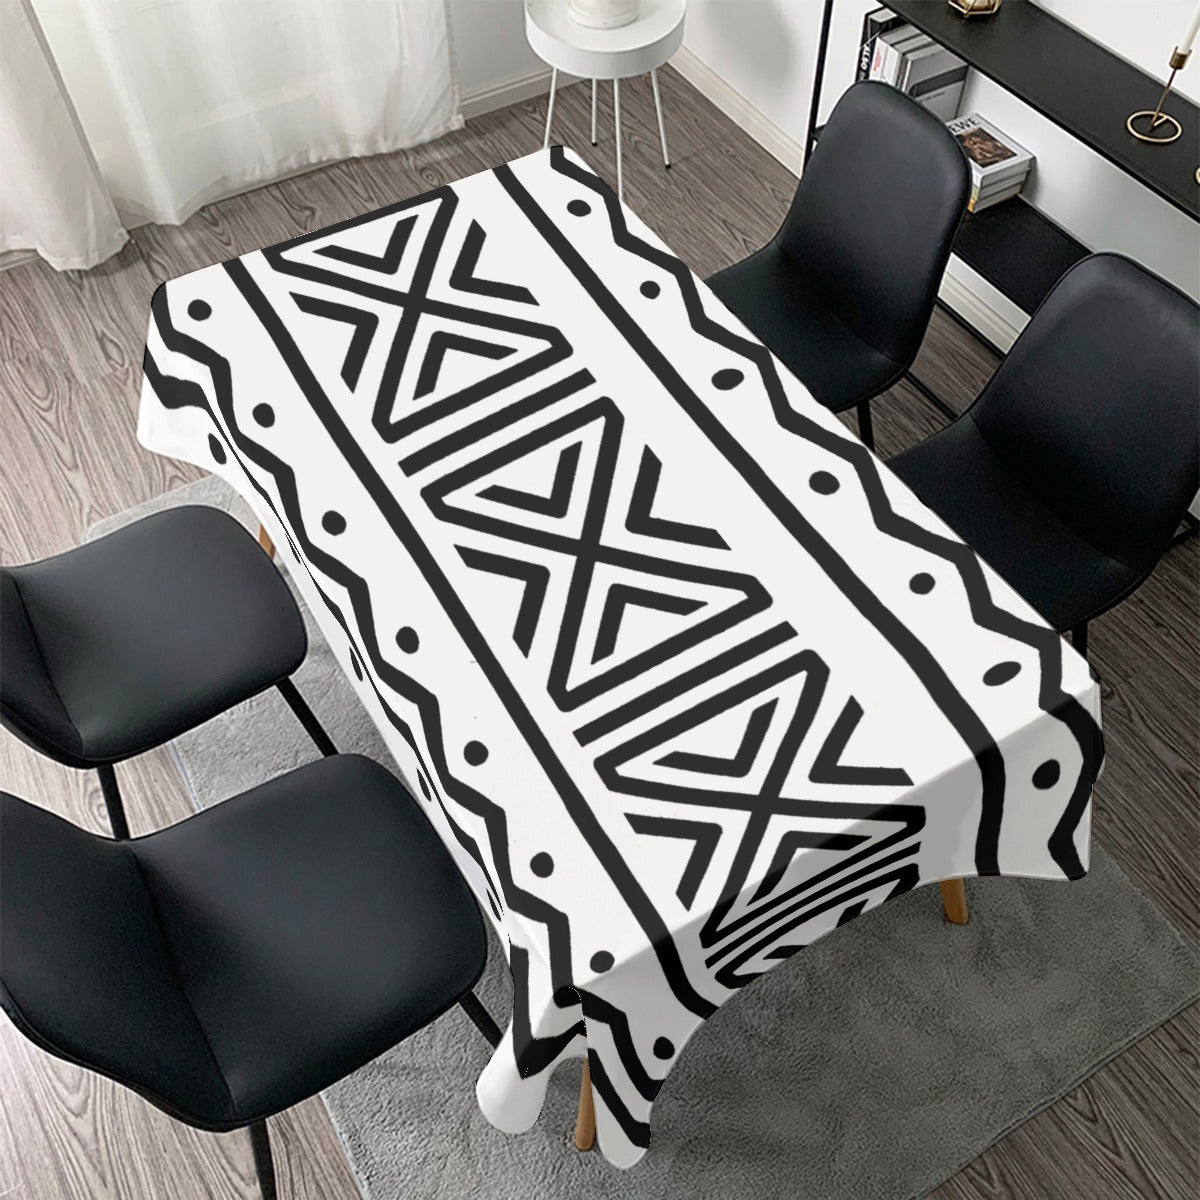 Afrocentric Tablecloth Tribal Print - Bynelo